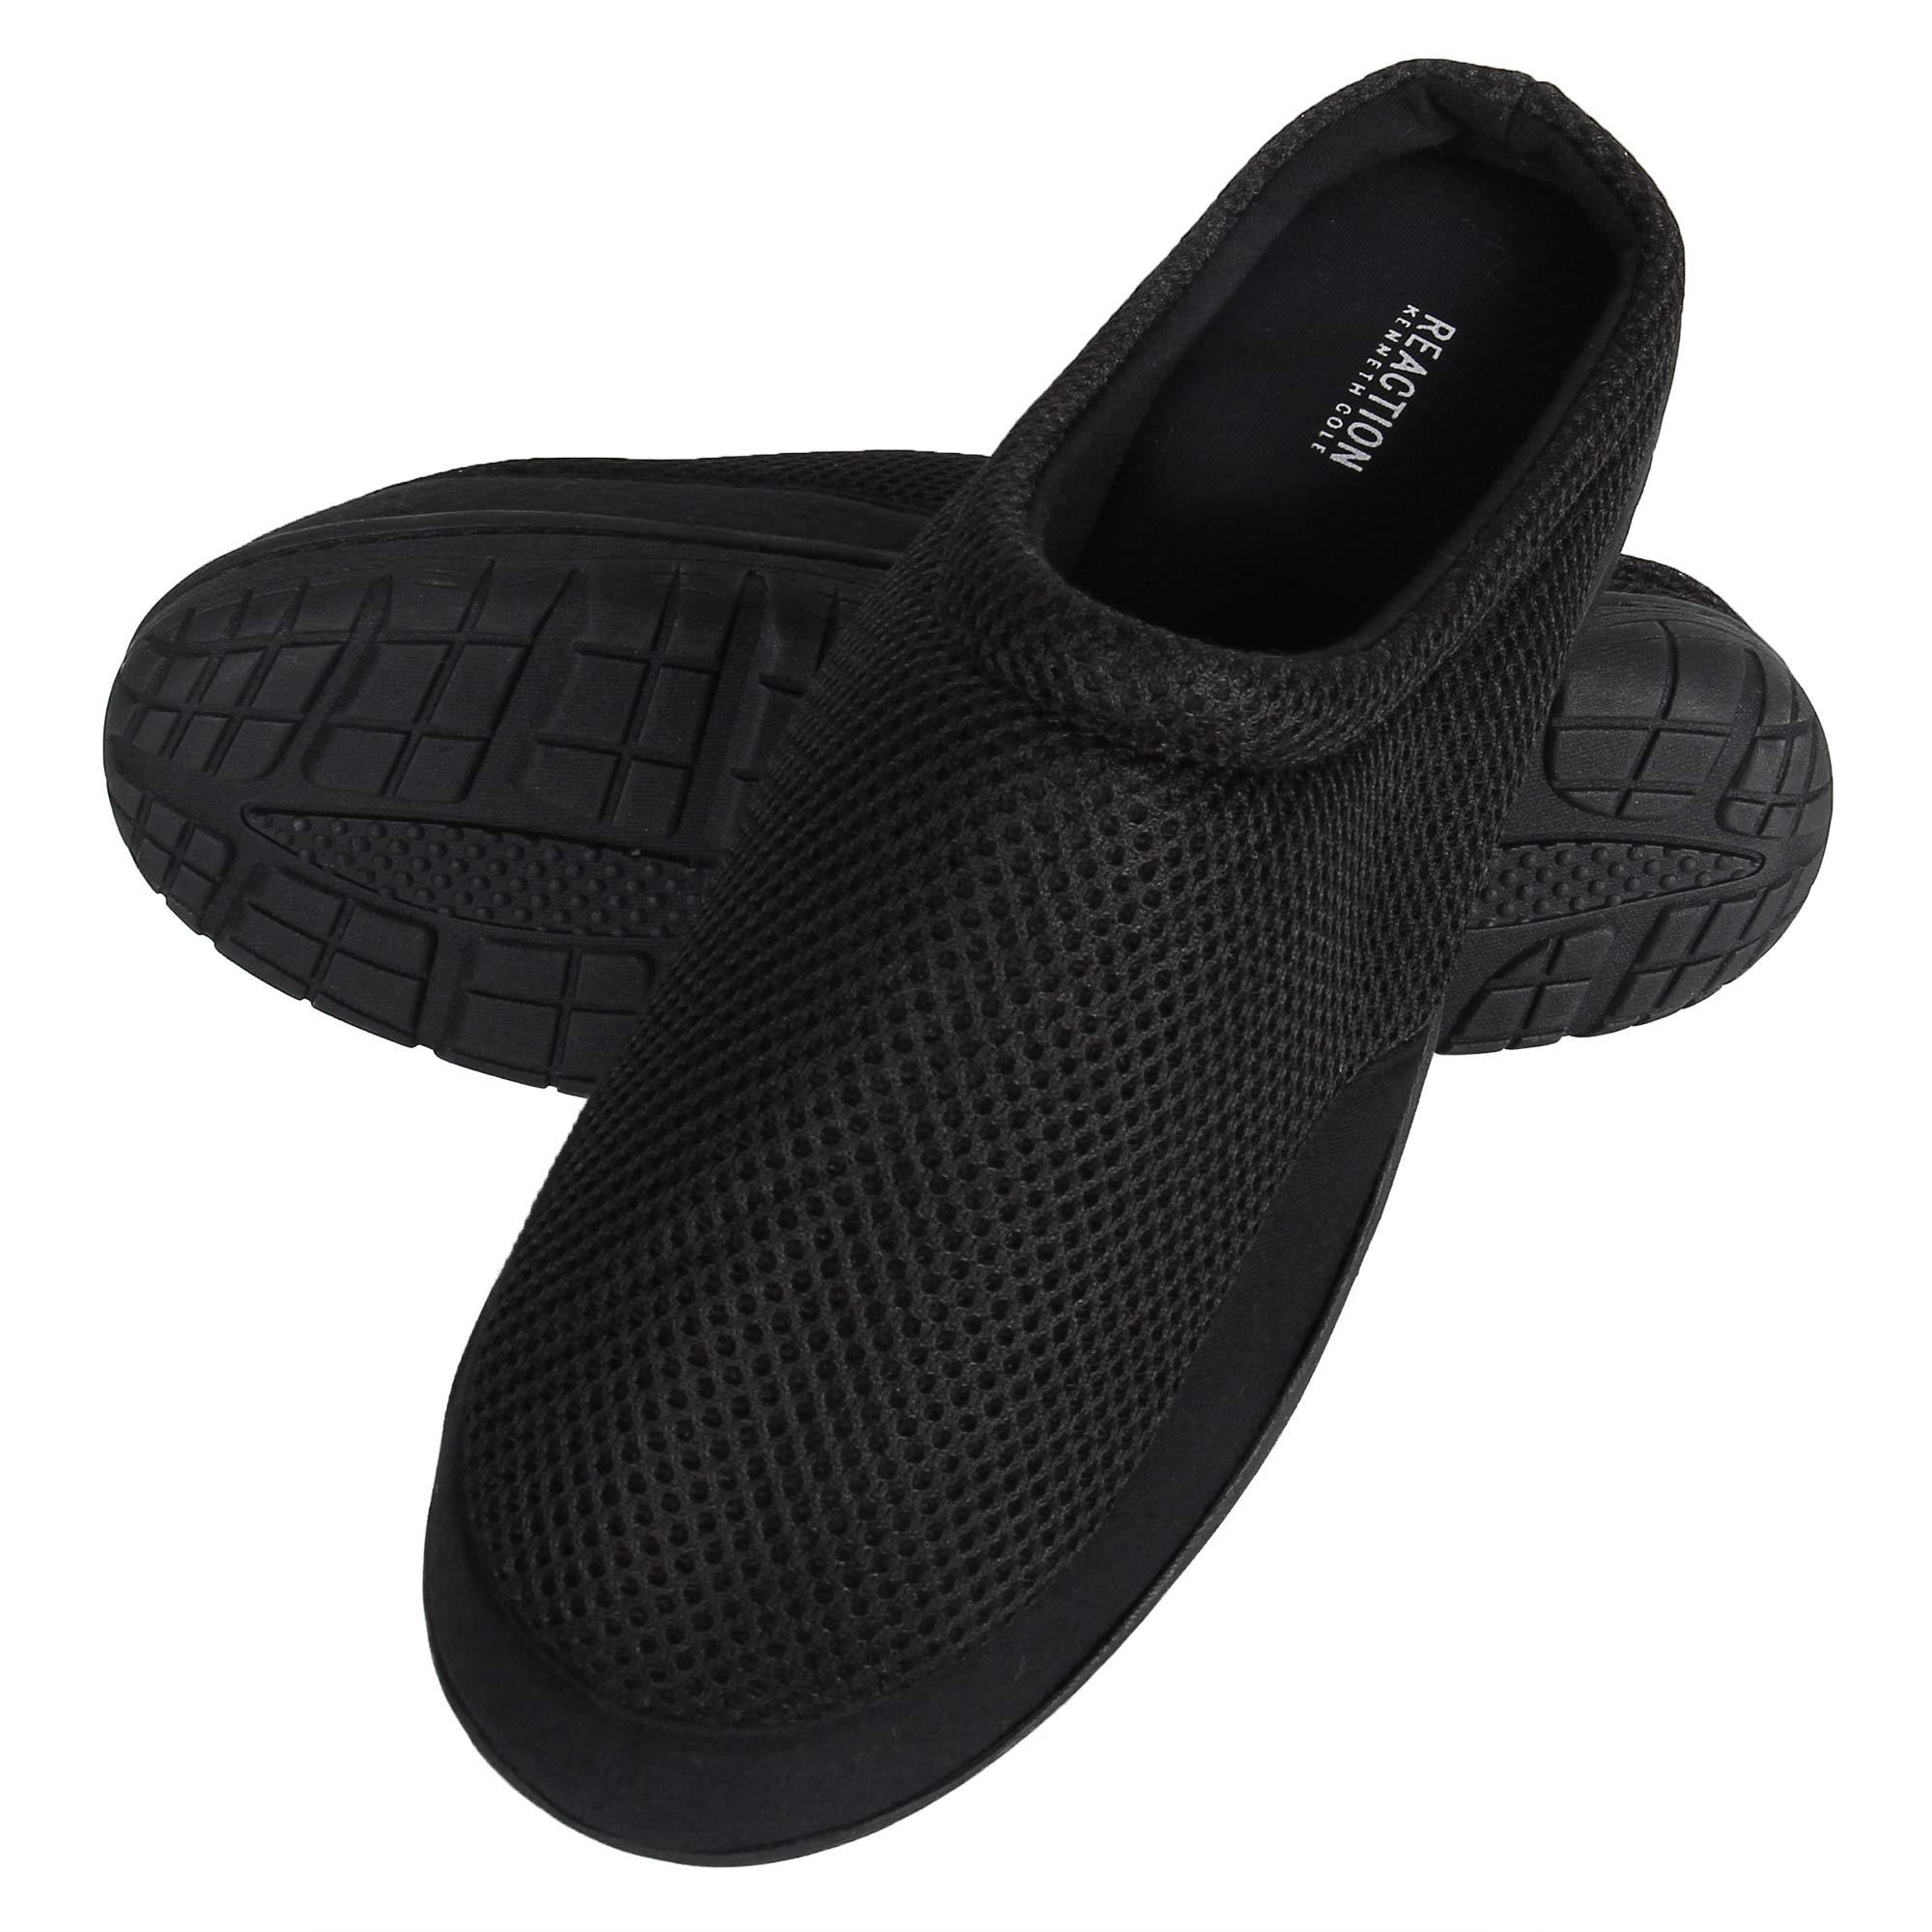 Kenneth Cole Reaction Rubber Clog Slipper House Shoes With Memory Foam ...